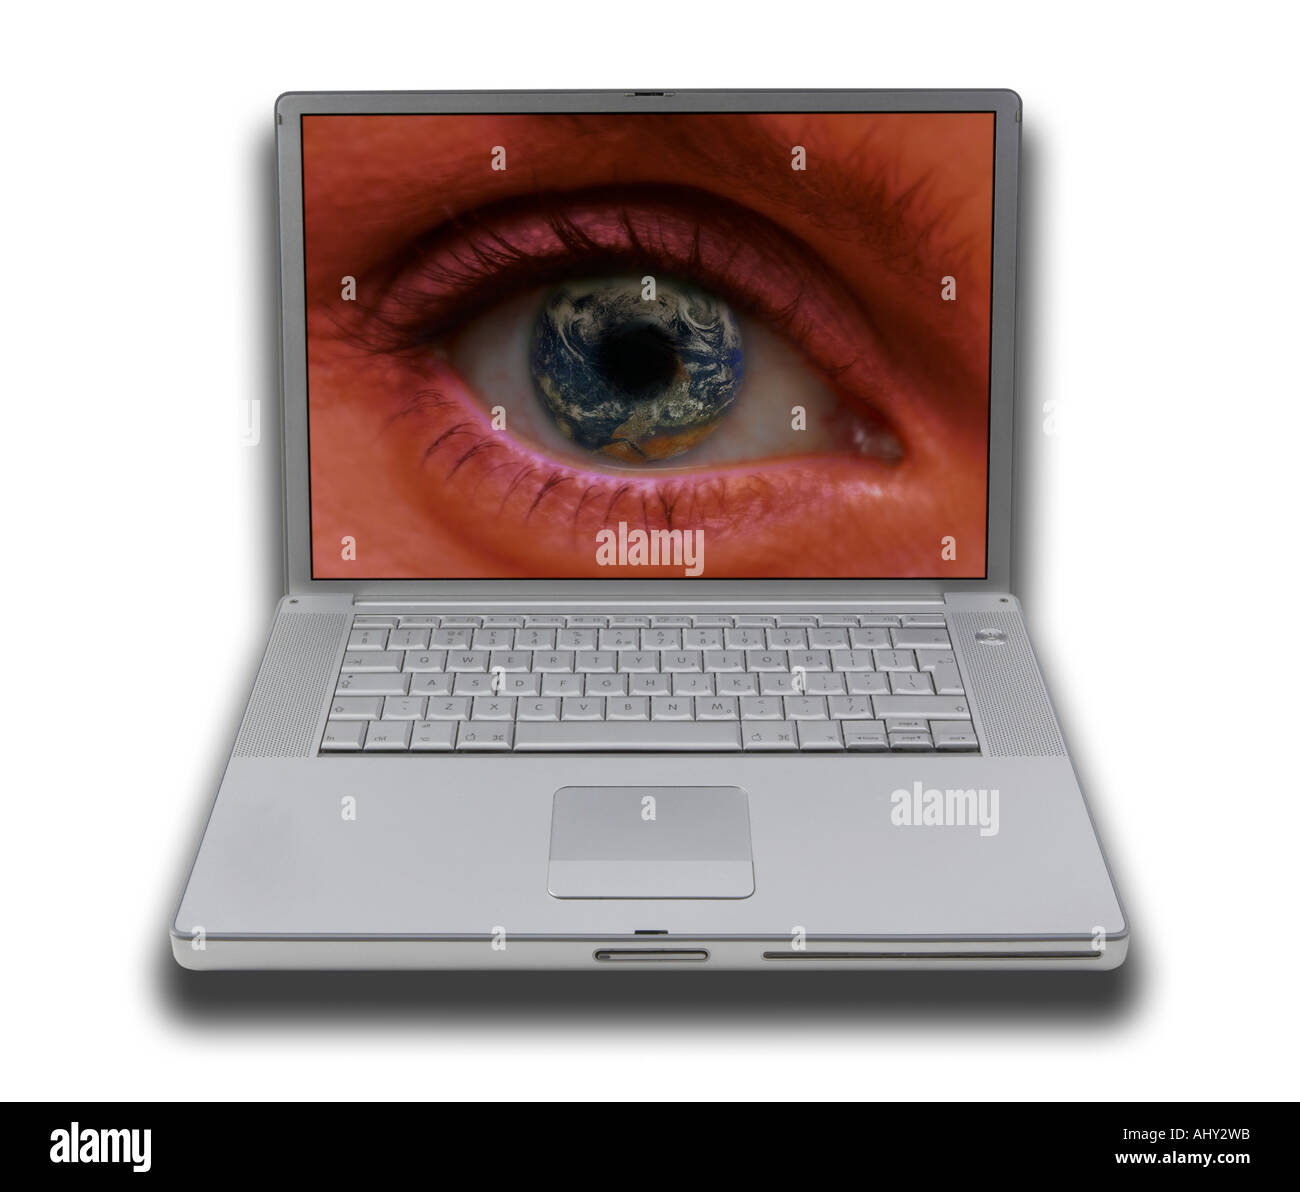 LAP TOP NOTE BOOK PERSONAL COMPUTER WITH SCREEN DISPLAYING PICTURE OF FEMALE EYE WITH PLANET EARTH IN PUPIL Stock Photo